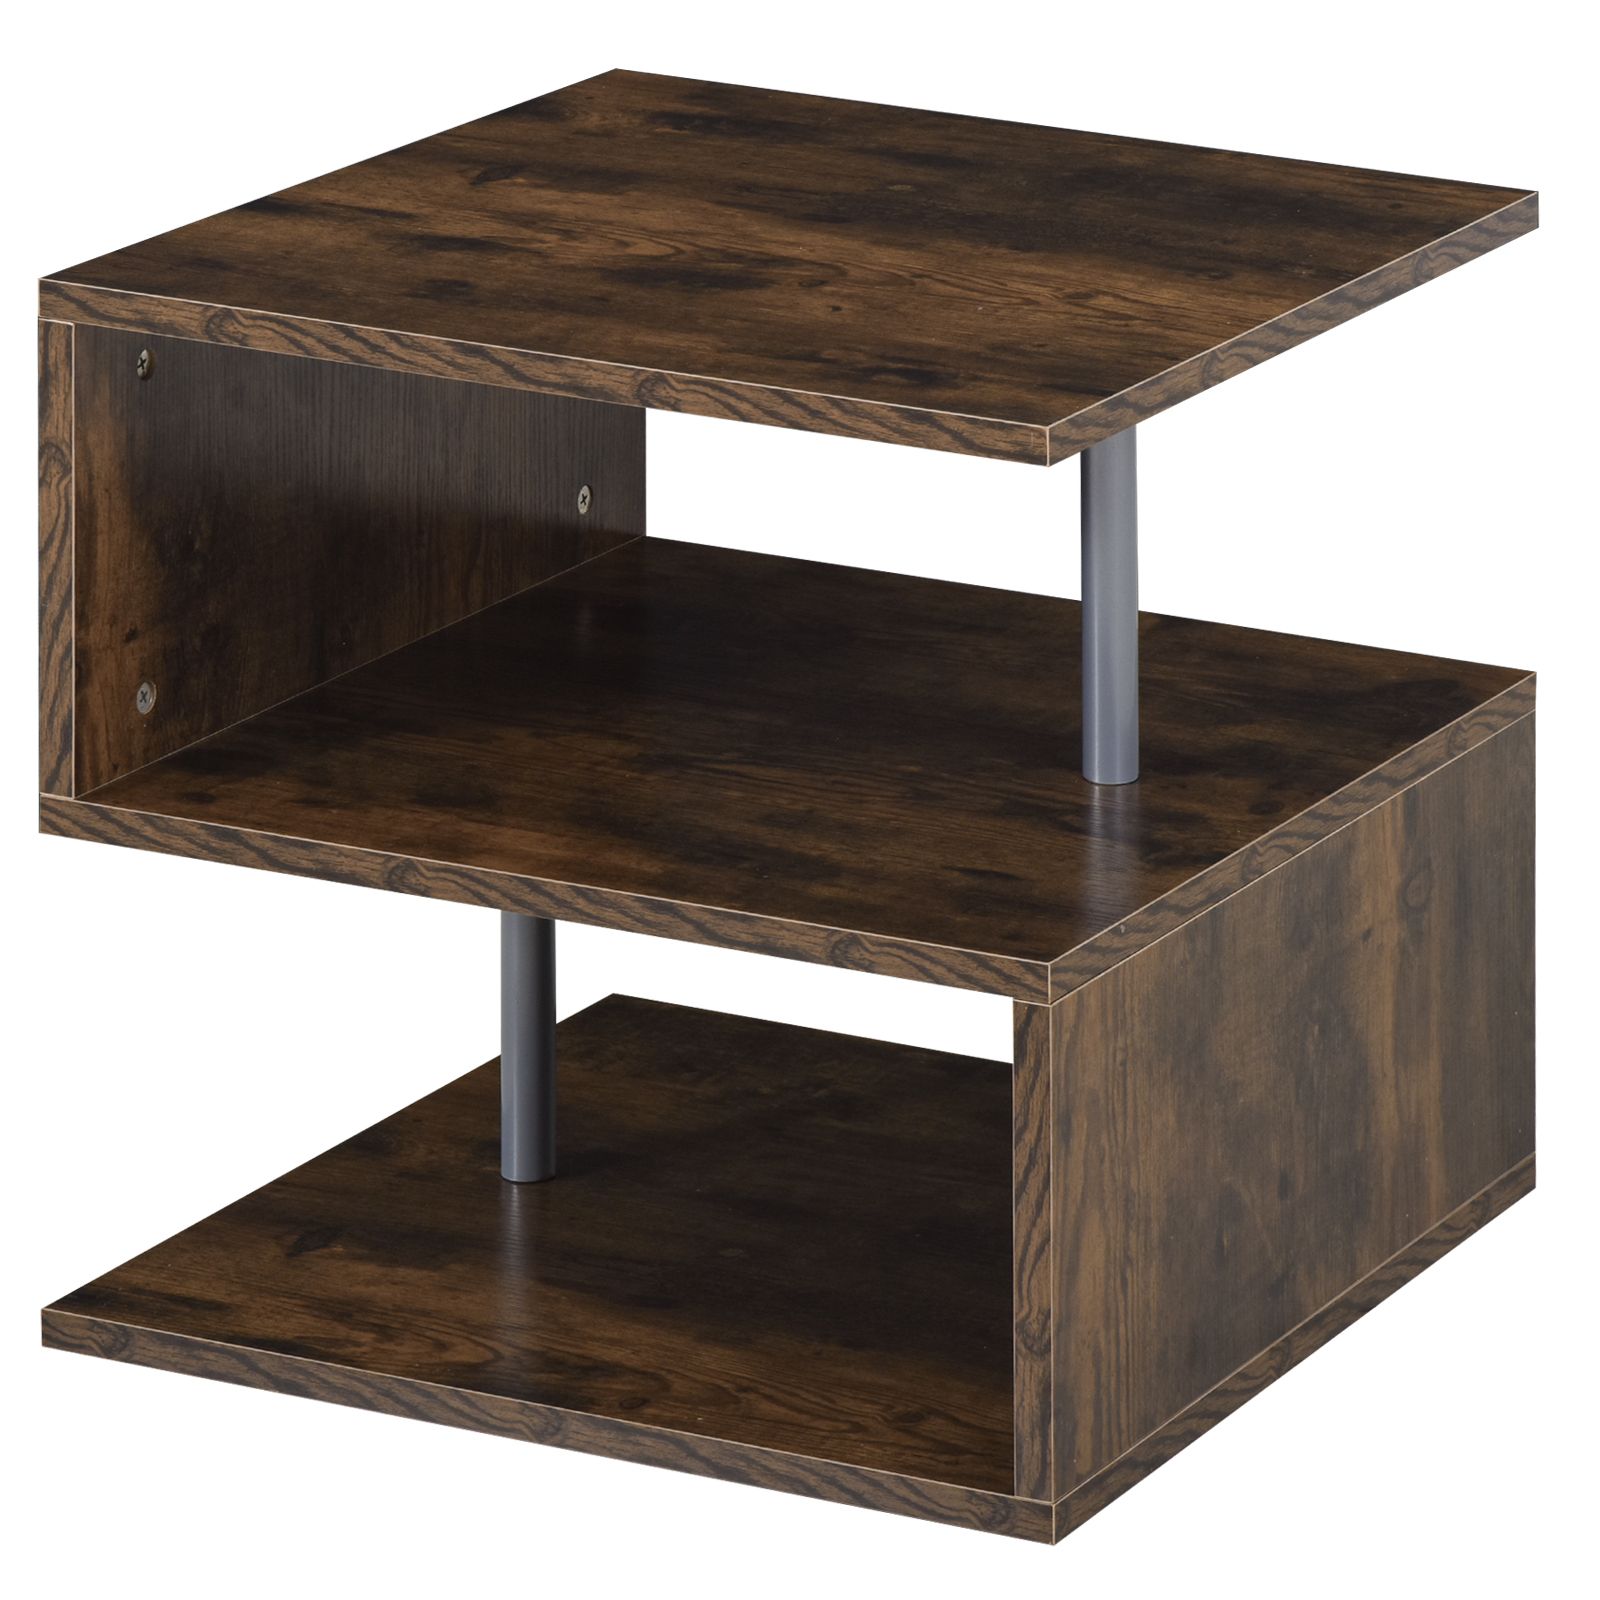 Homcom Coffee End Table S Shape 2 Tier Storage Shelves Organizer With Regard To Wood Coffee Tables With 2 Tier Storage (View 14 of 15)